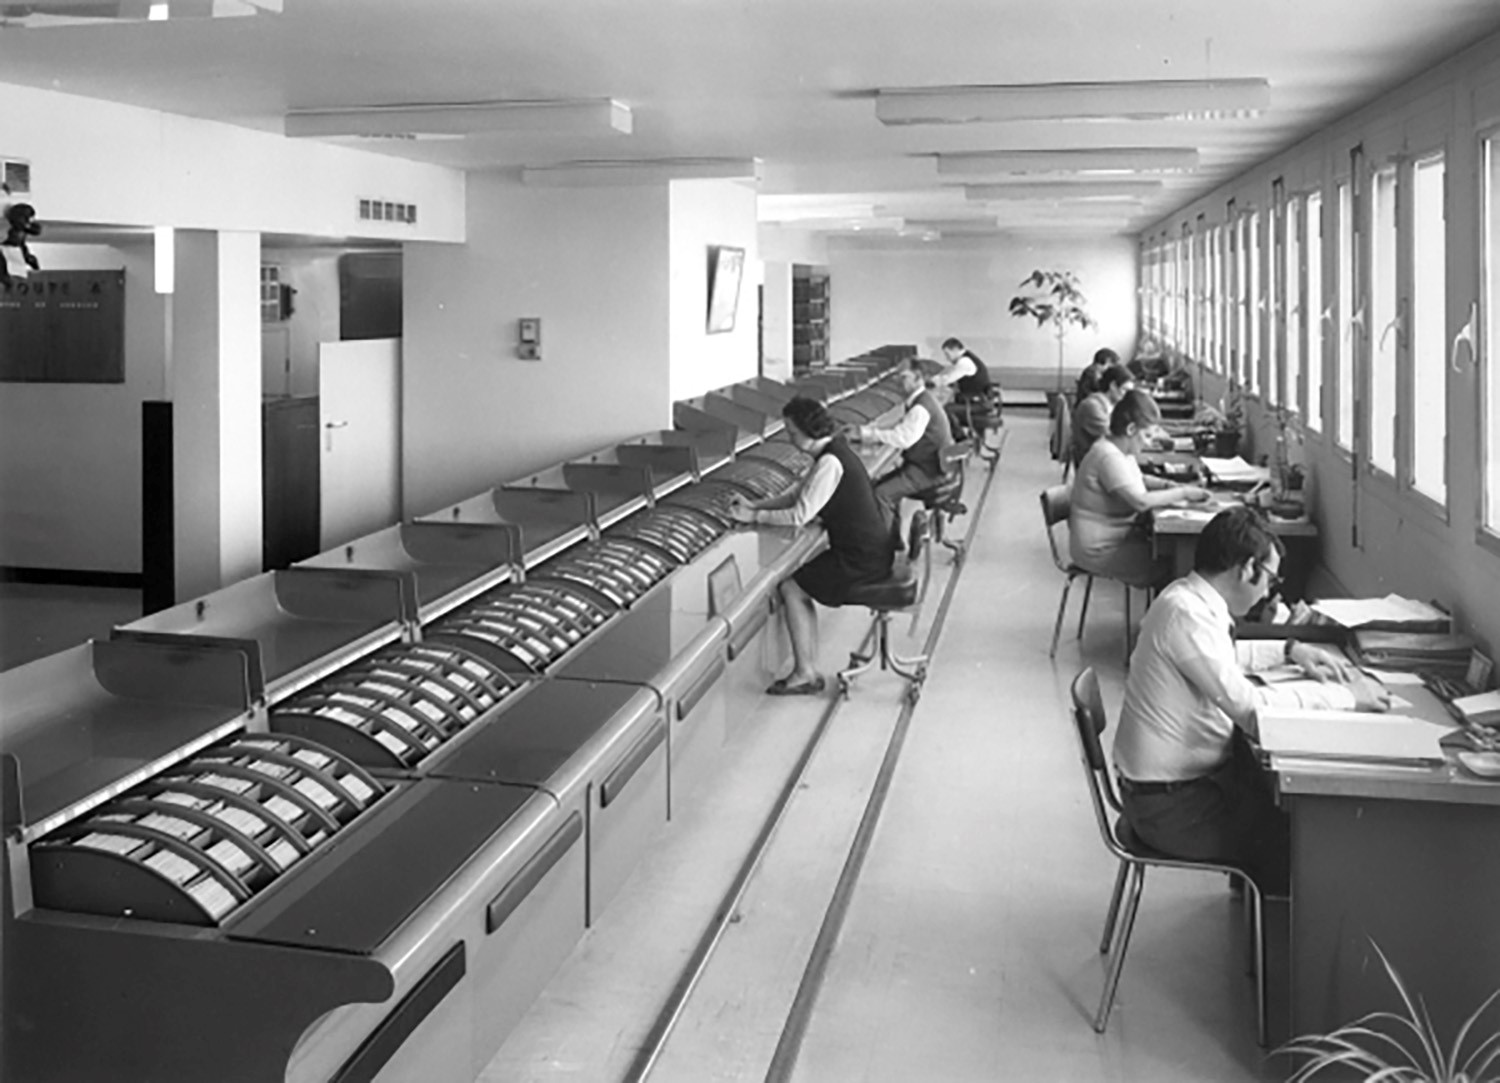 The black-and-white picture shows men and women in the hall at desks.